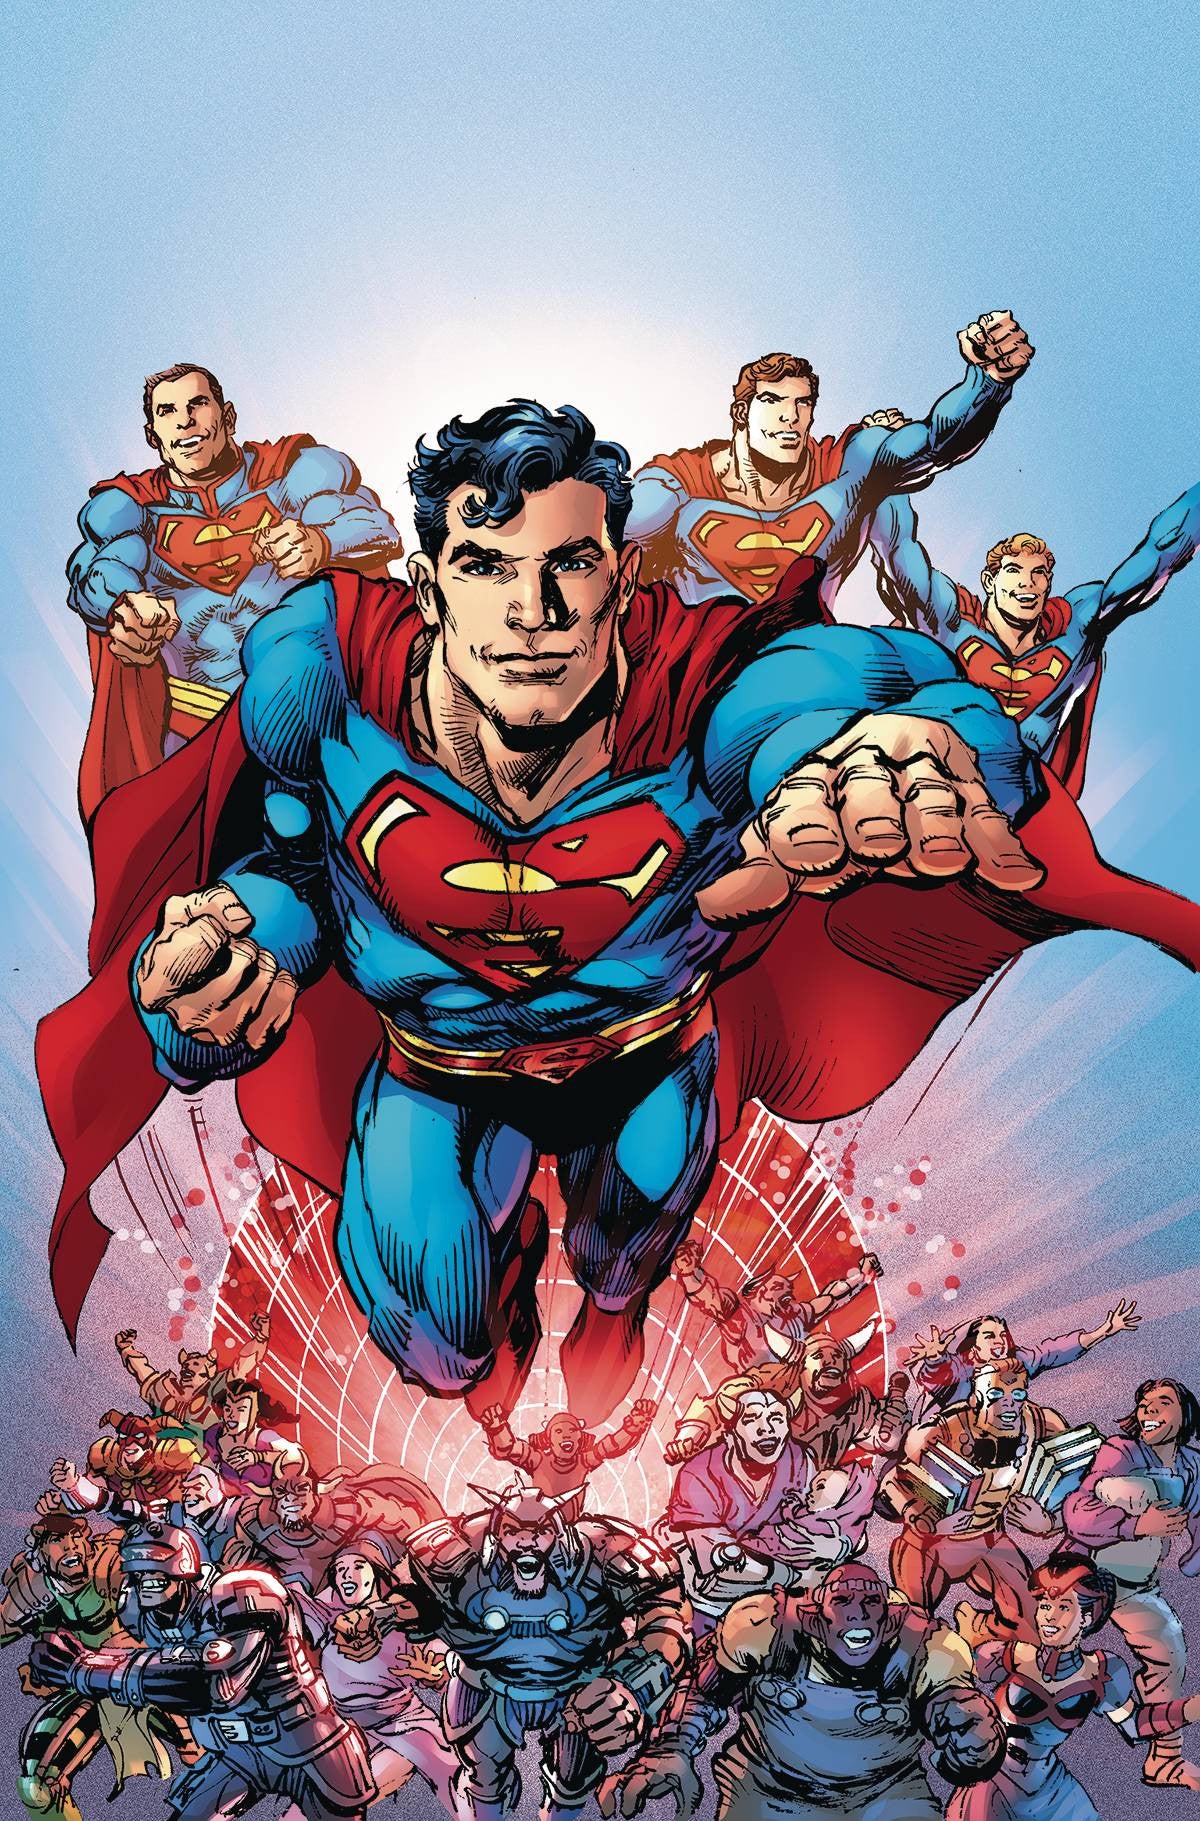 SUPERMAN THE COMING OF THE SUPERMEN #6 (OF 6) COVER